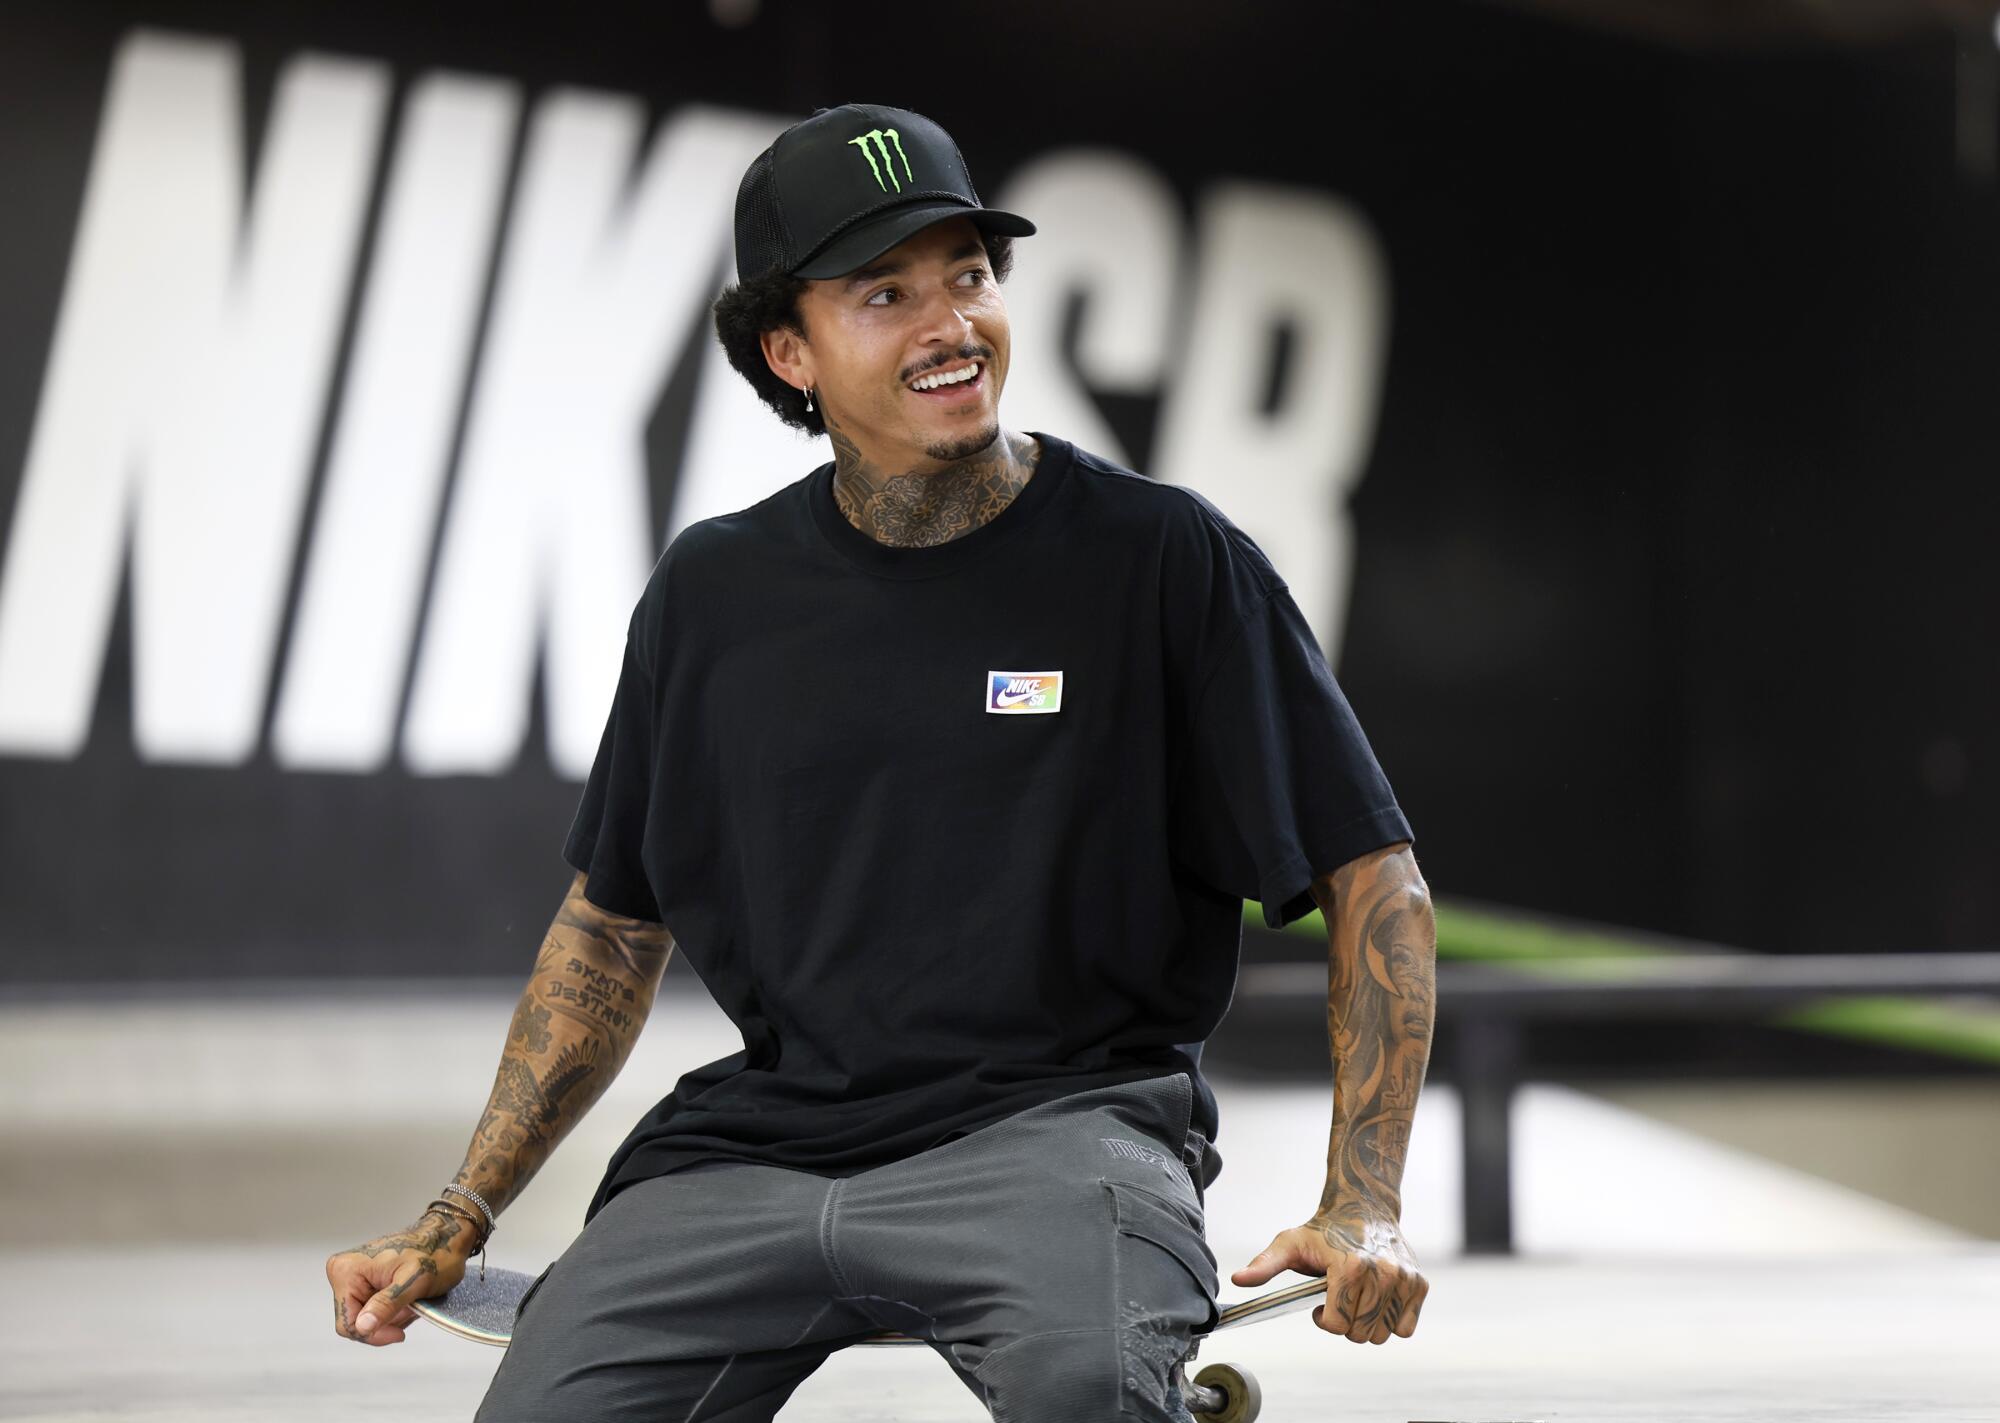 Nyjah Huston smiles while talking to friends during training in San Clemente.